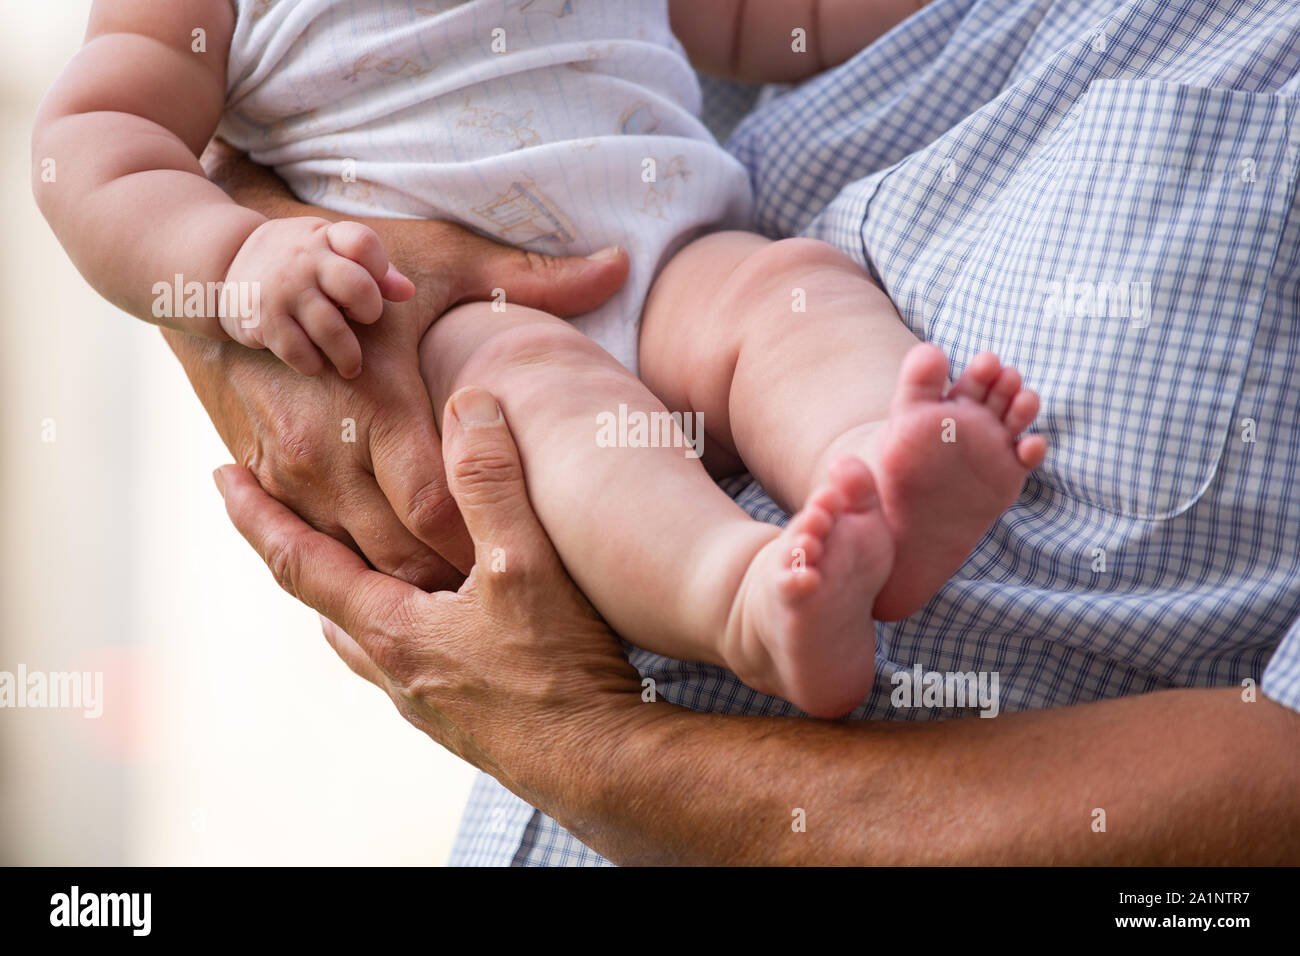 A father holds a baby in his arms Stock Photo